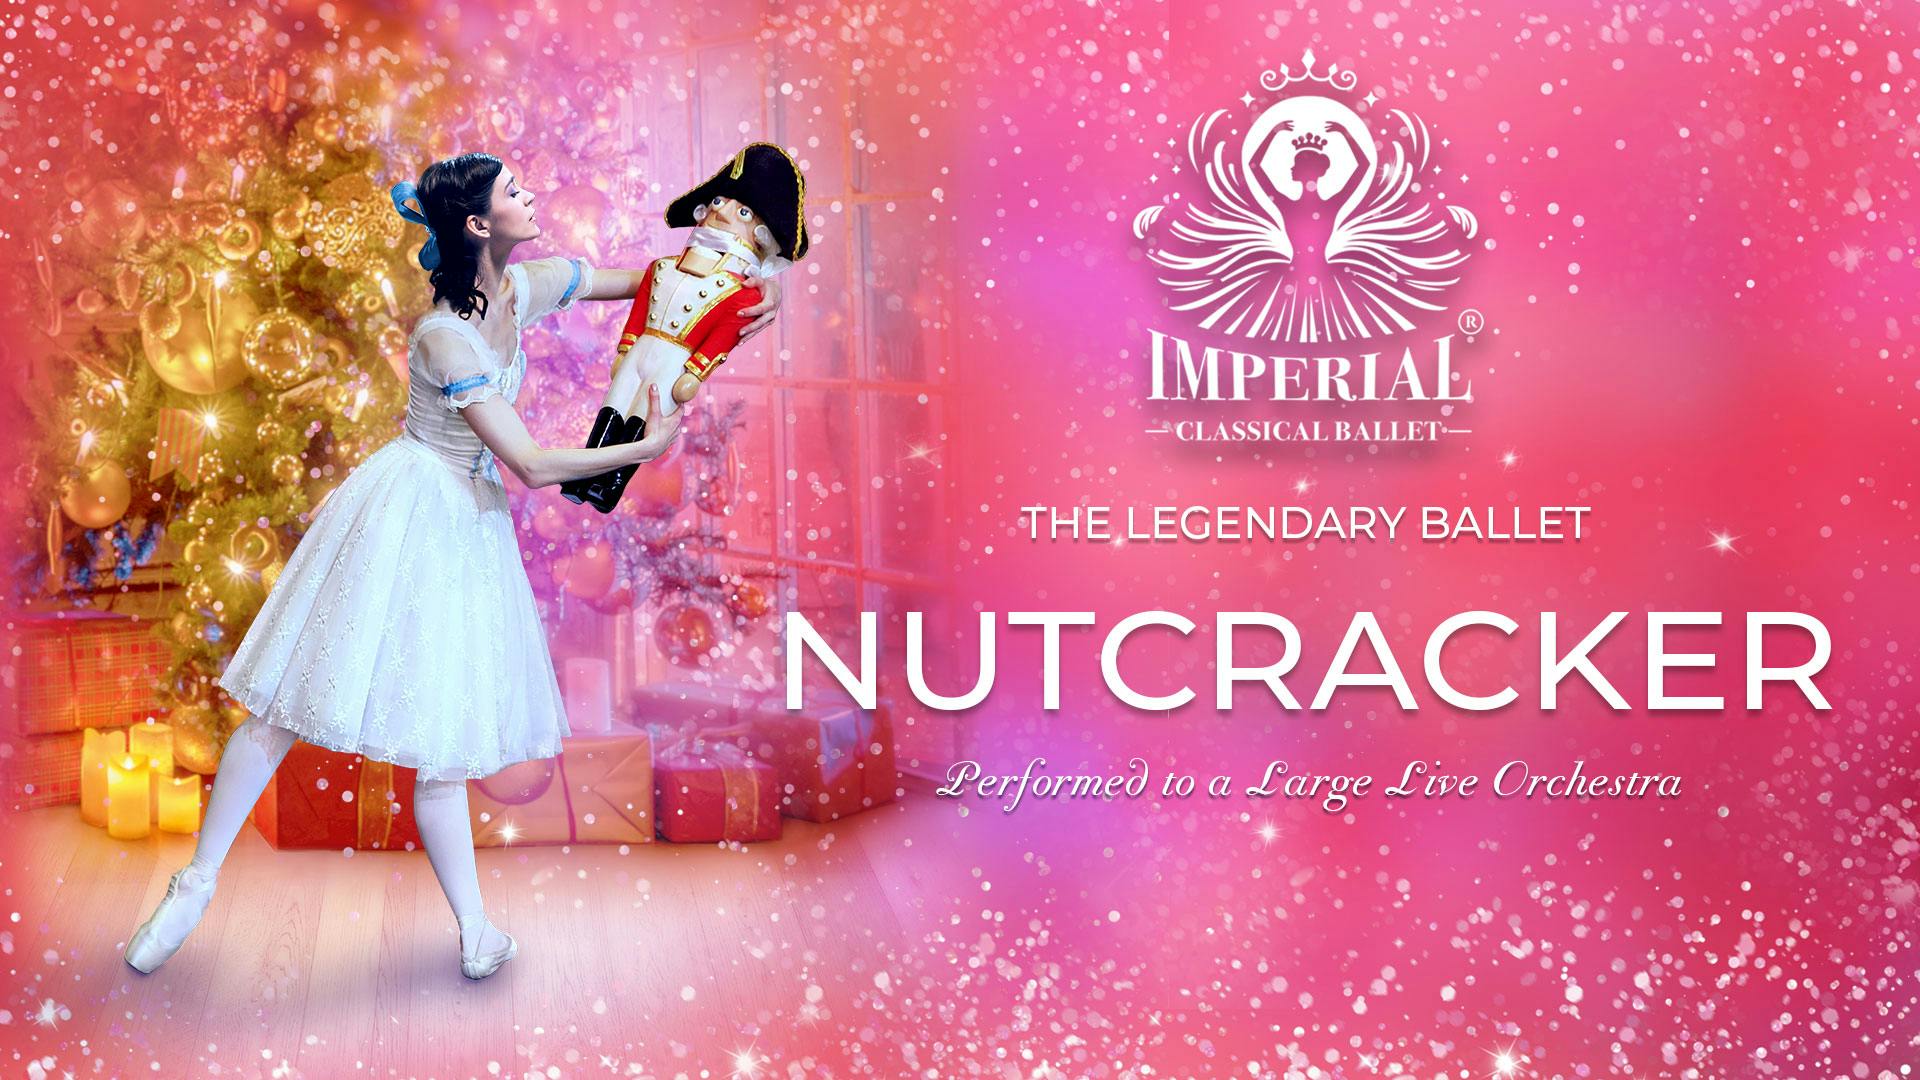 Nutcracker Performed by the Imperial Classical Ballet hero